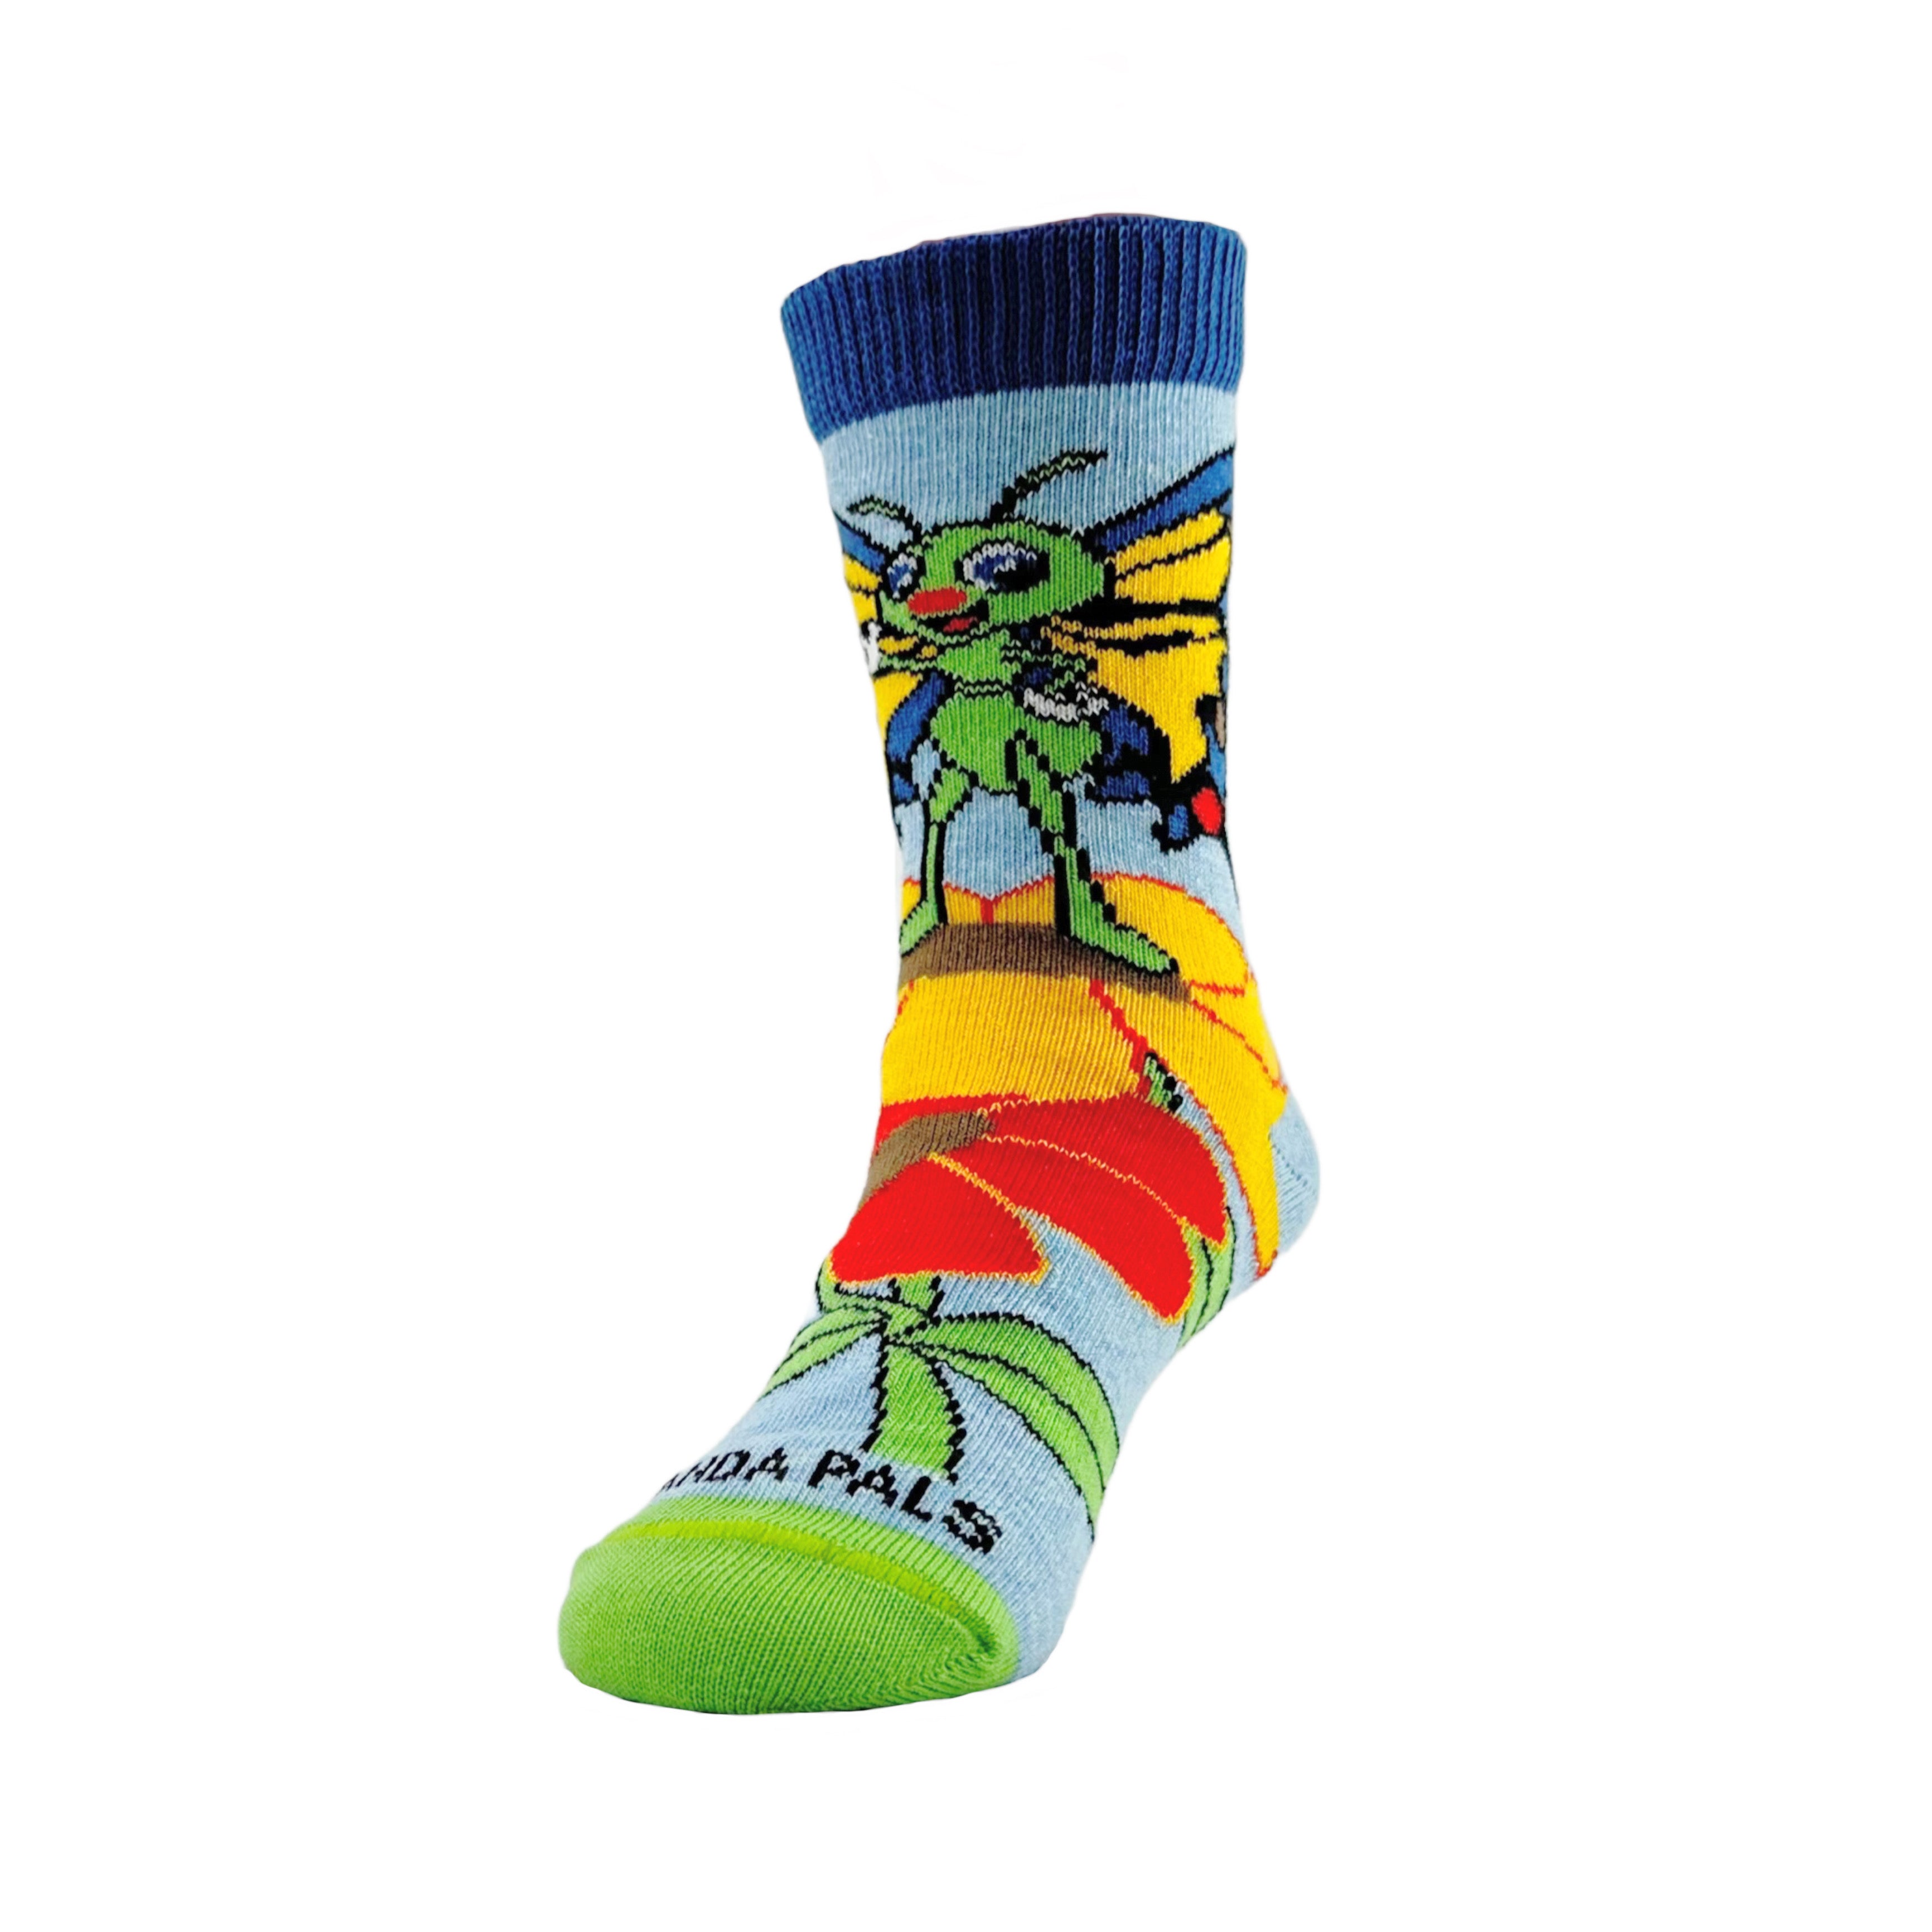 Butterfly Socks from the Sock Panda (Ages 3-7)